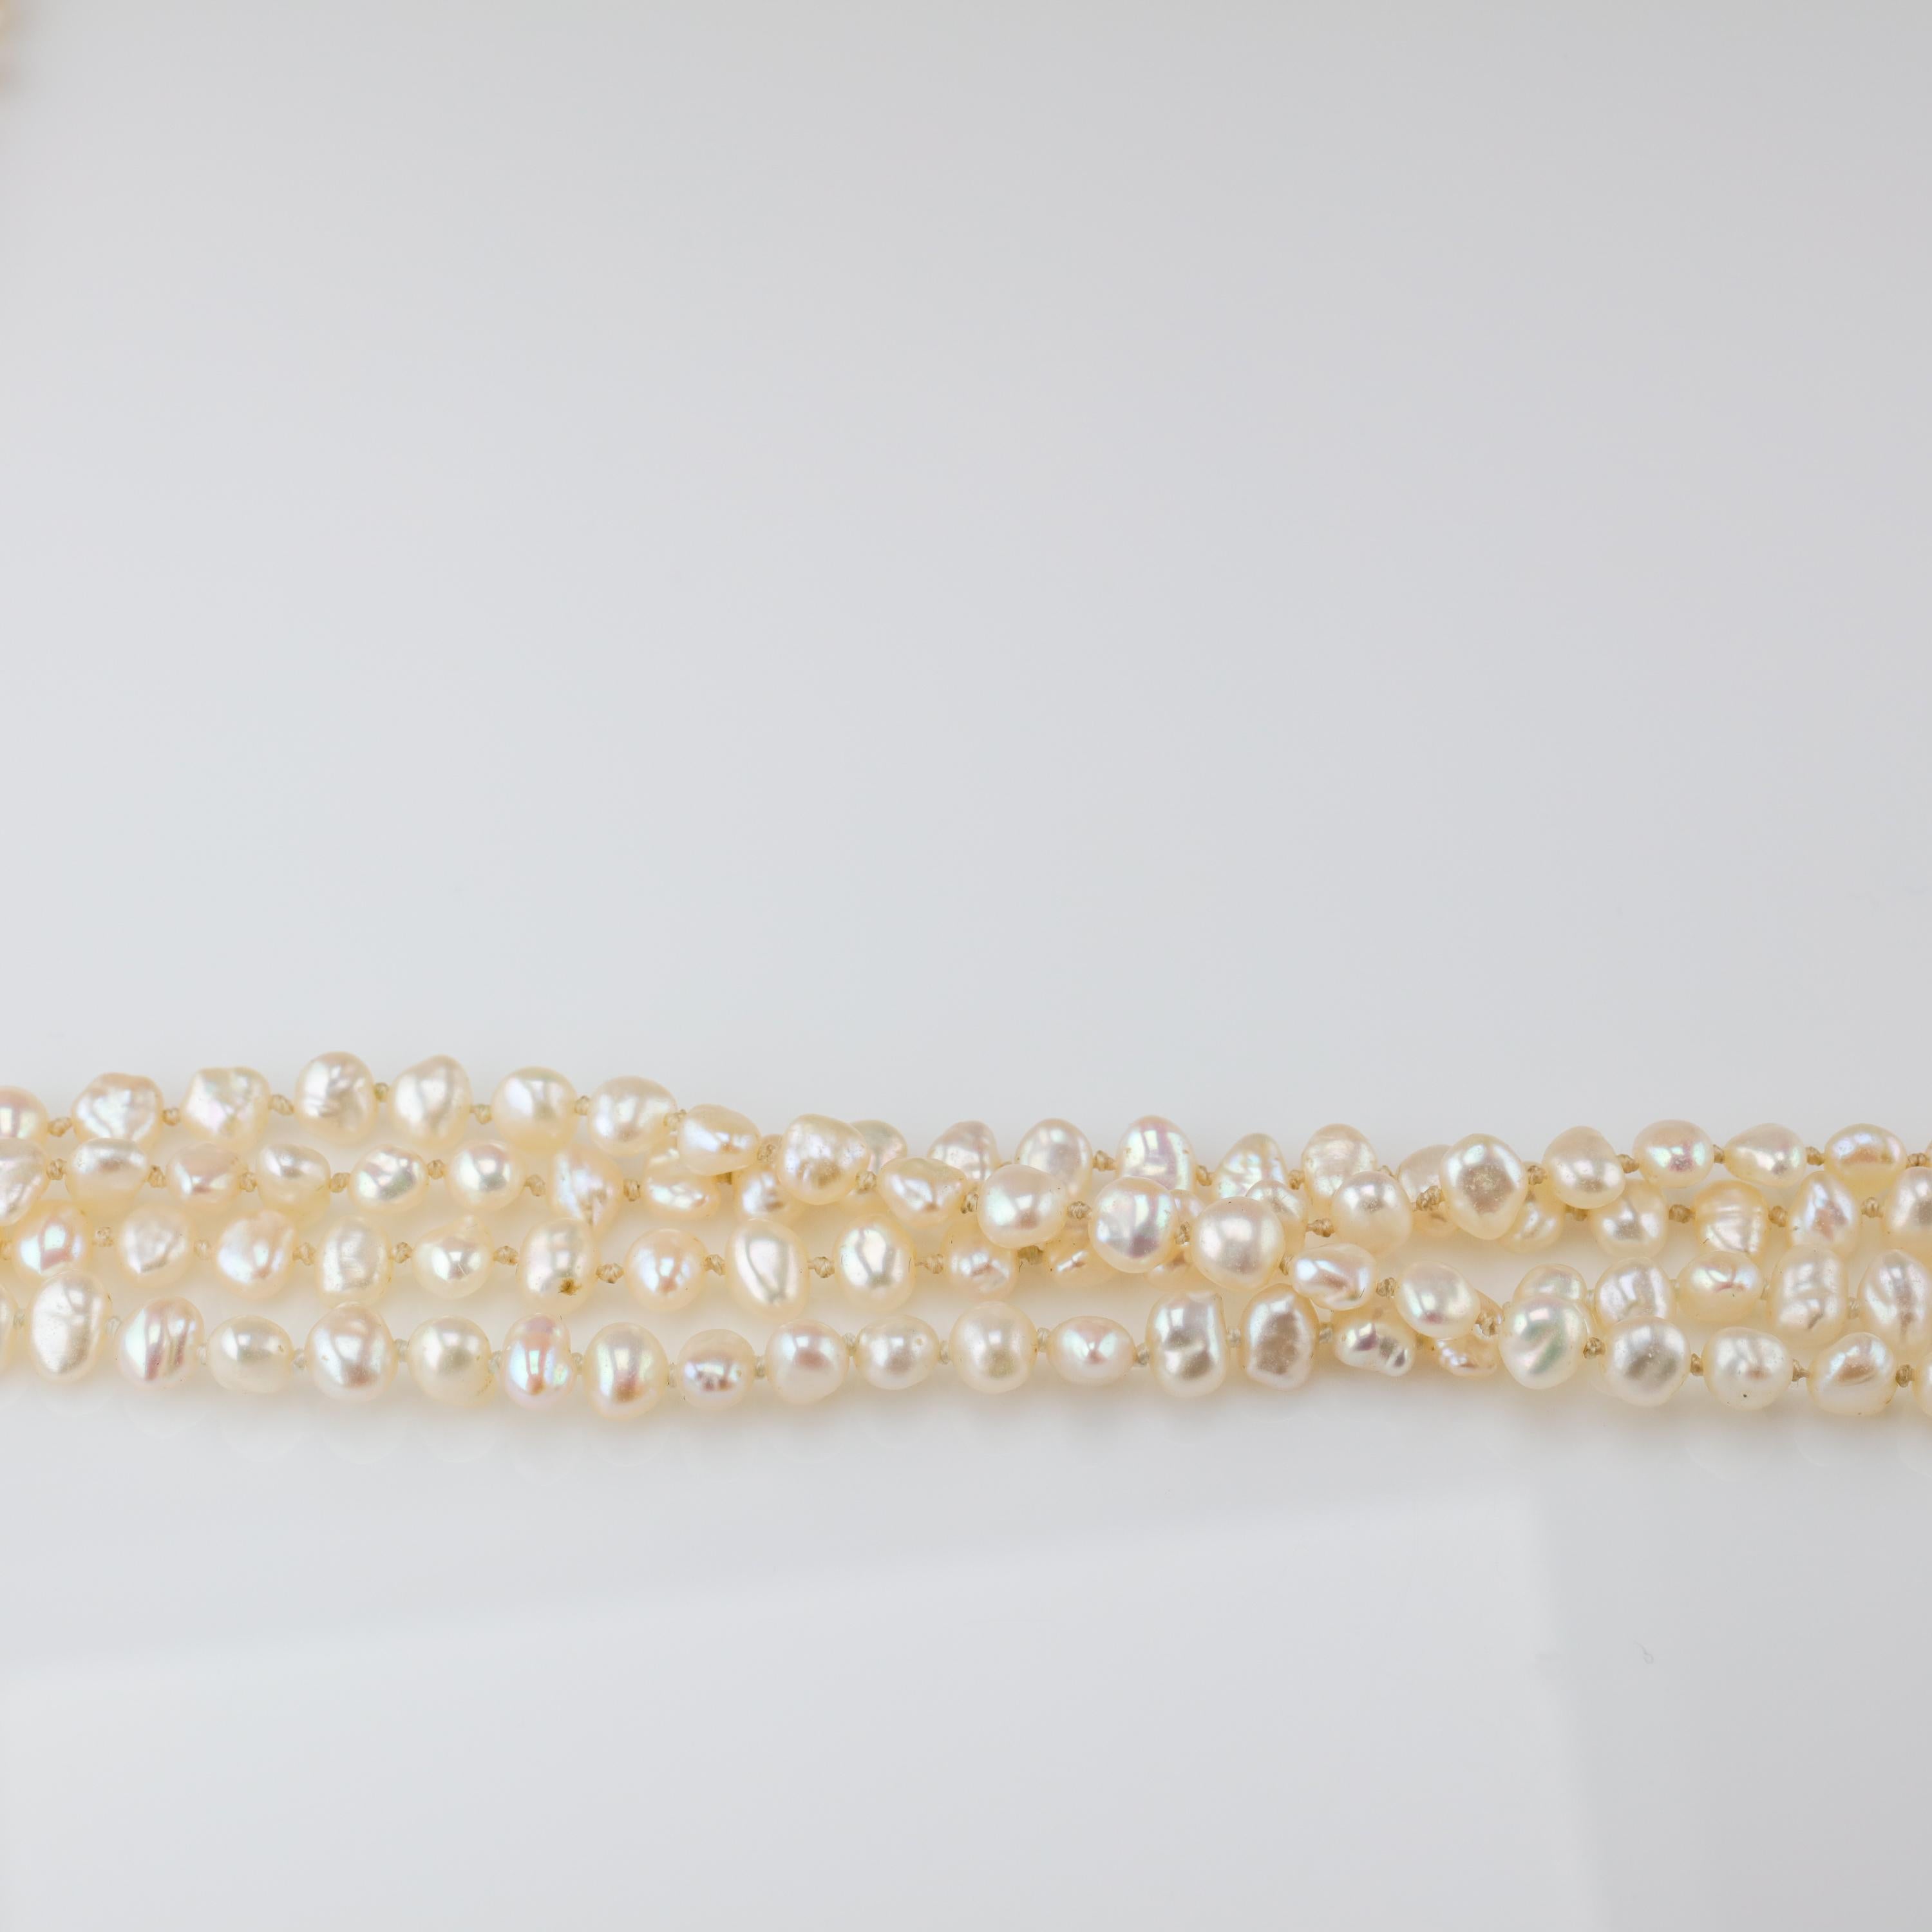 Gump's Pearl and Opal Necklace Features Rare & Authentic Biwa Pearls 3